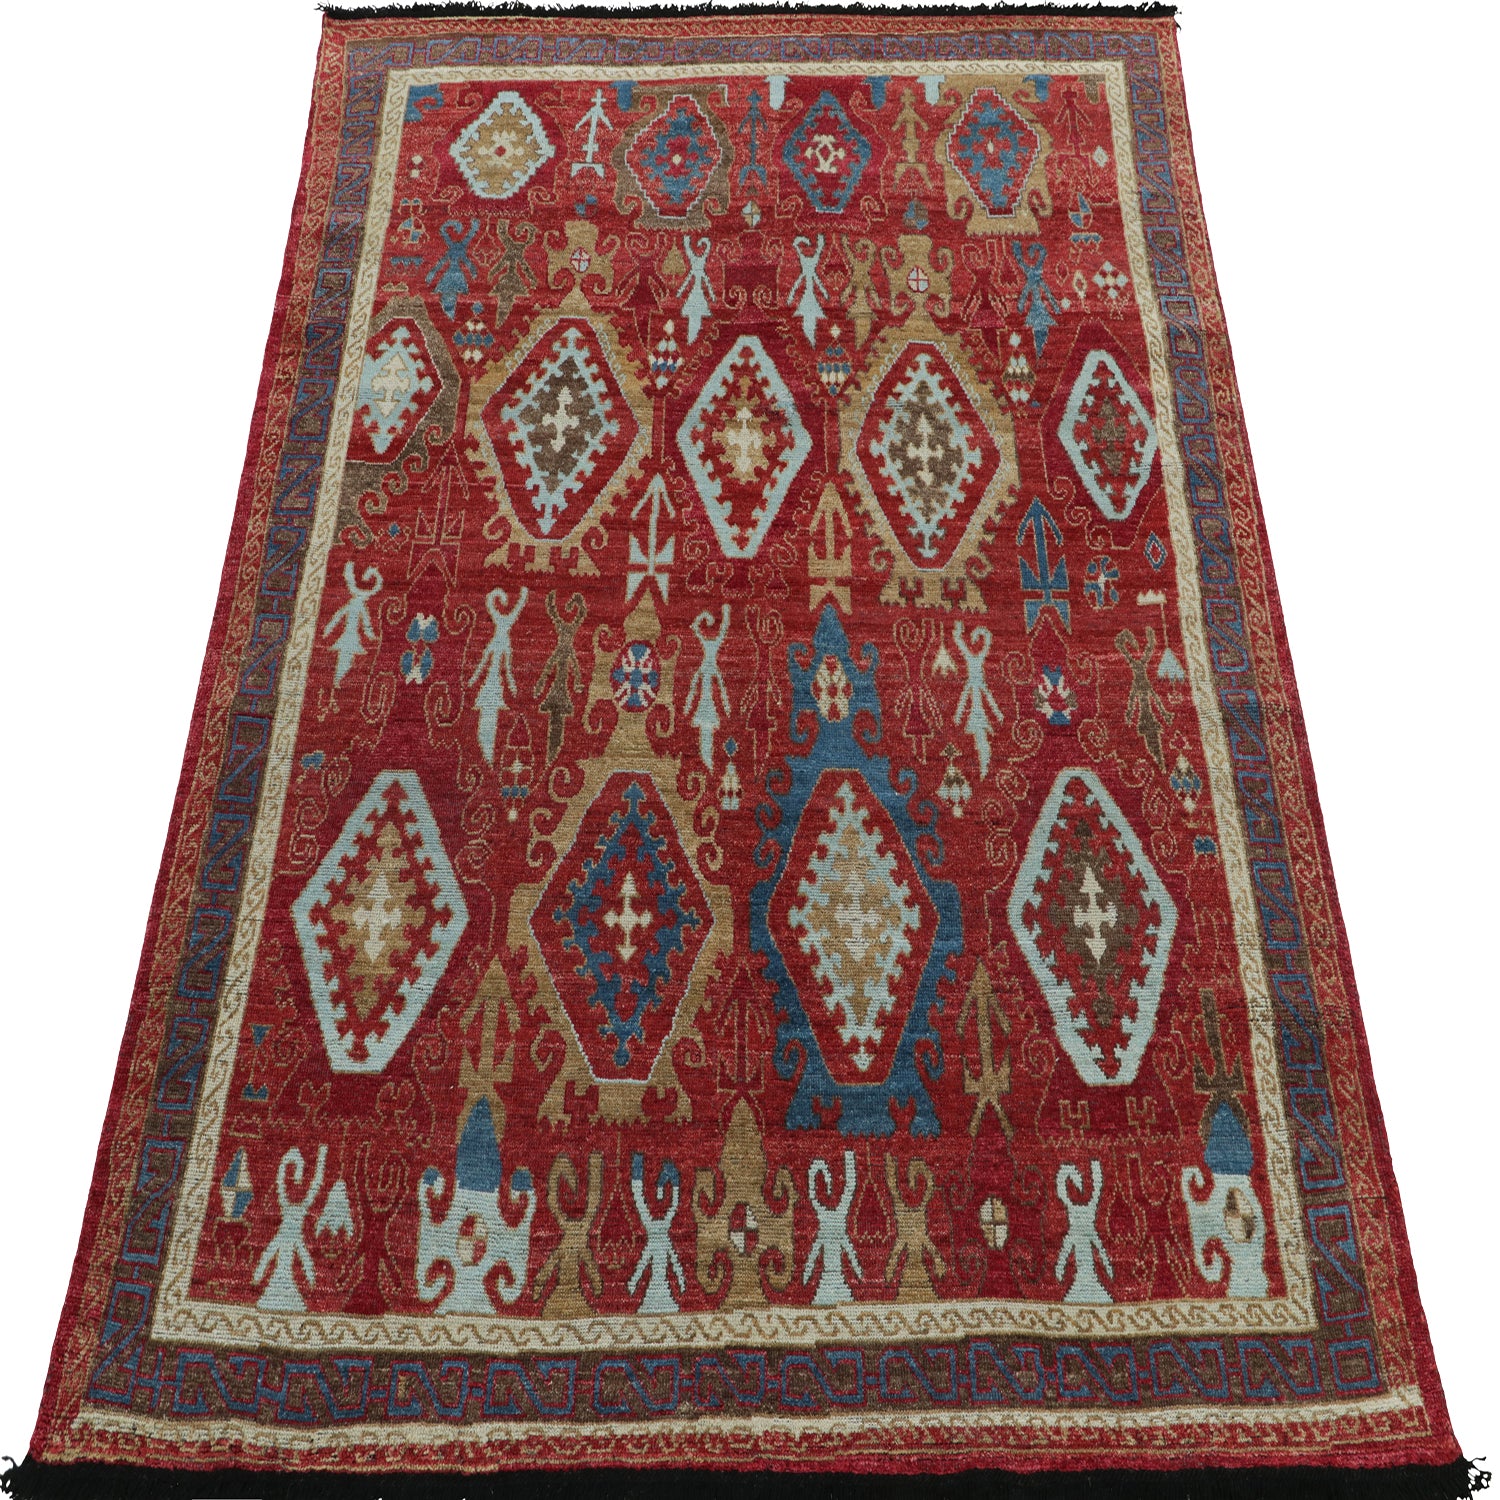 Ornately designed, hand-woven rug of Middle Eastern origin; rich colors.